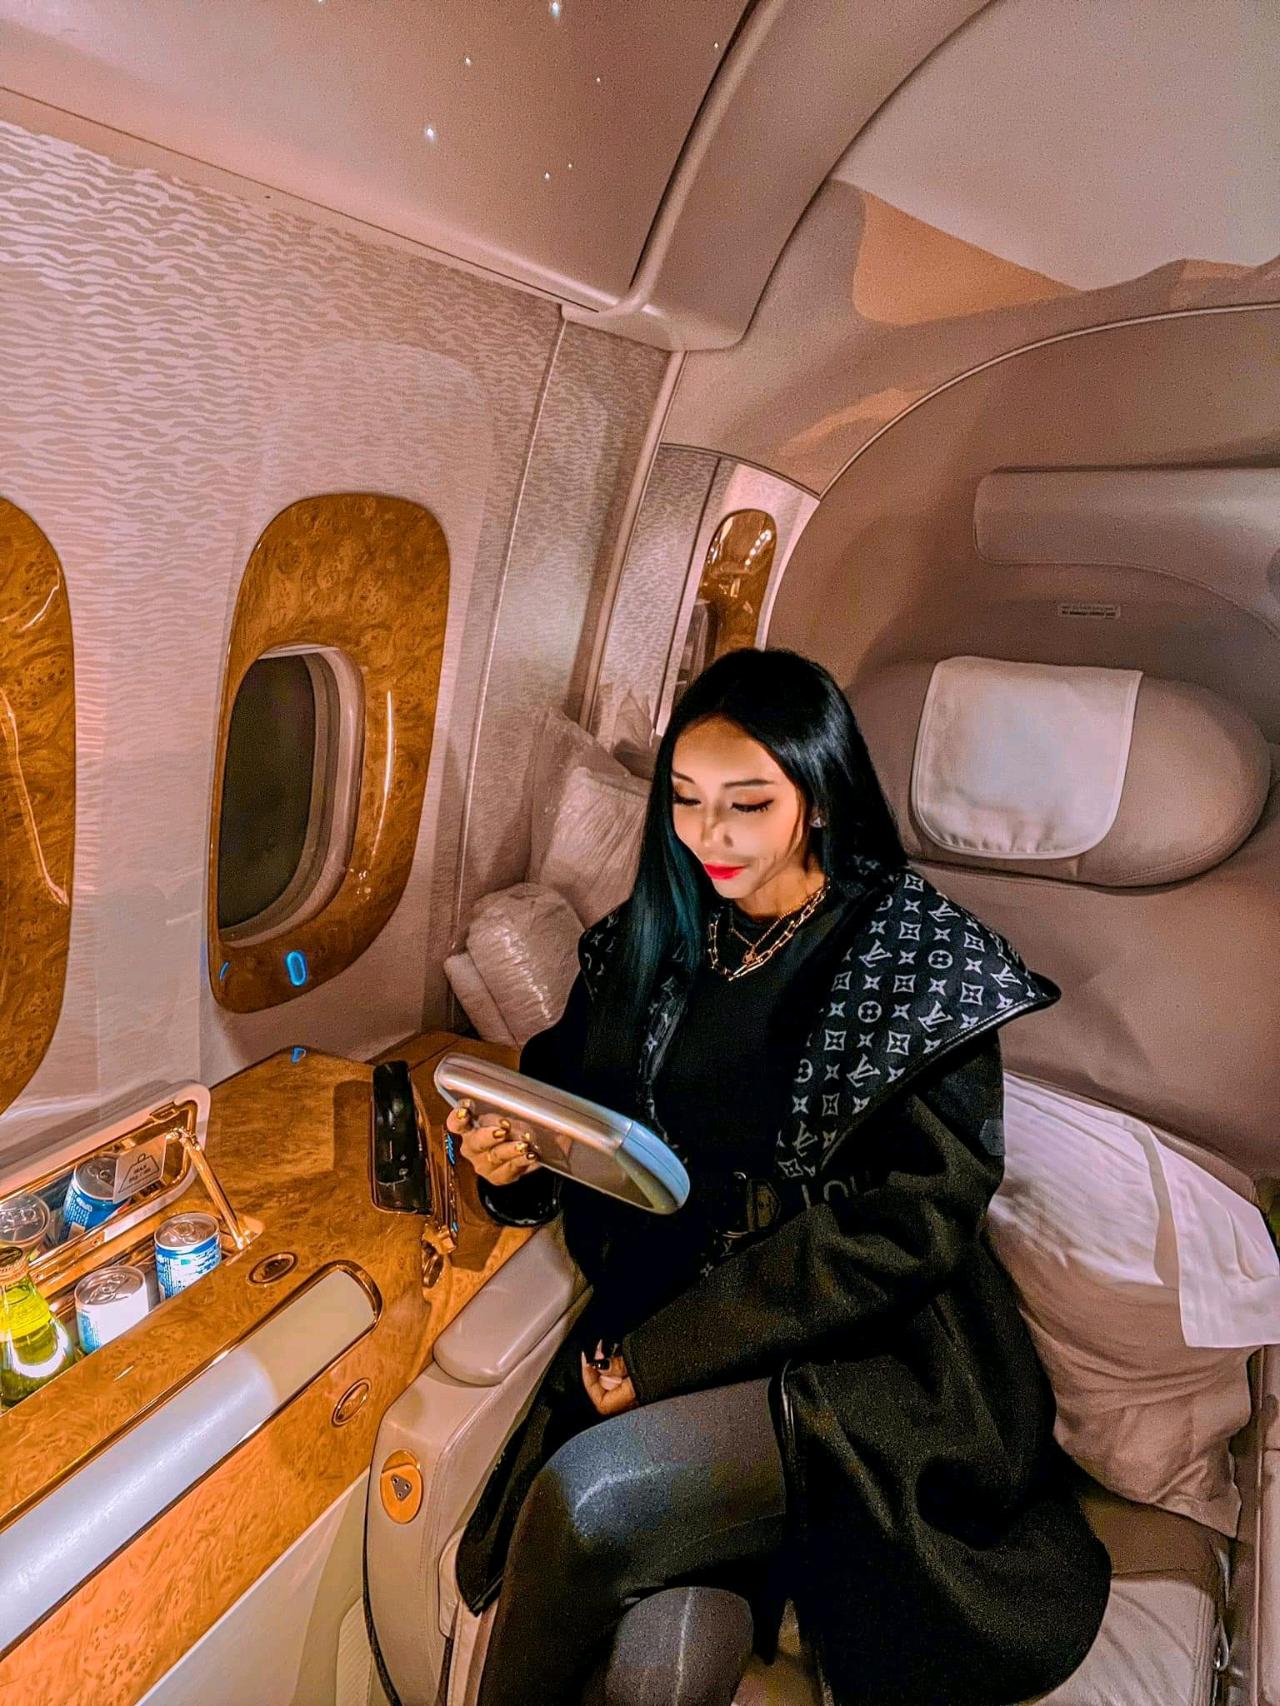 Emirates First Class B777 Malaysia to USA First class: 8 Private Suites / Business class: 42 angle flat seats / Economy class: 310 seats Bag: 32kg x 2pc + 7kg x